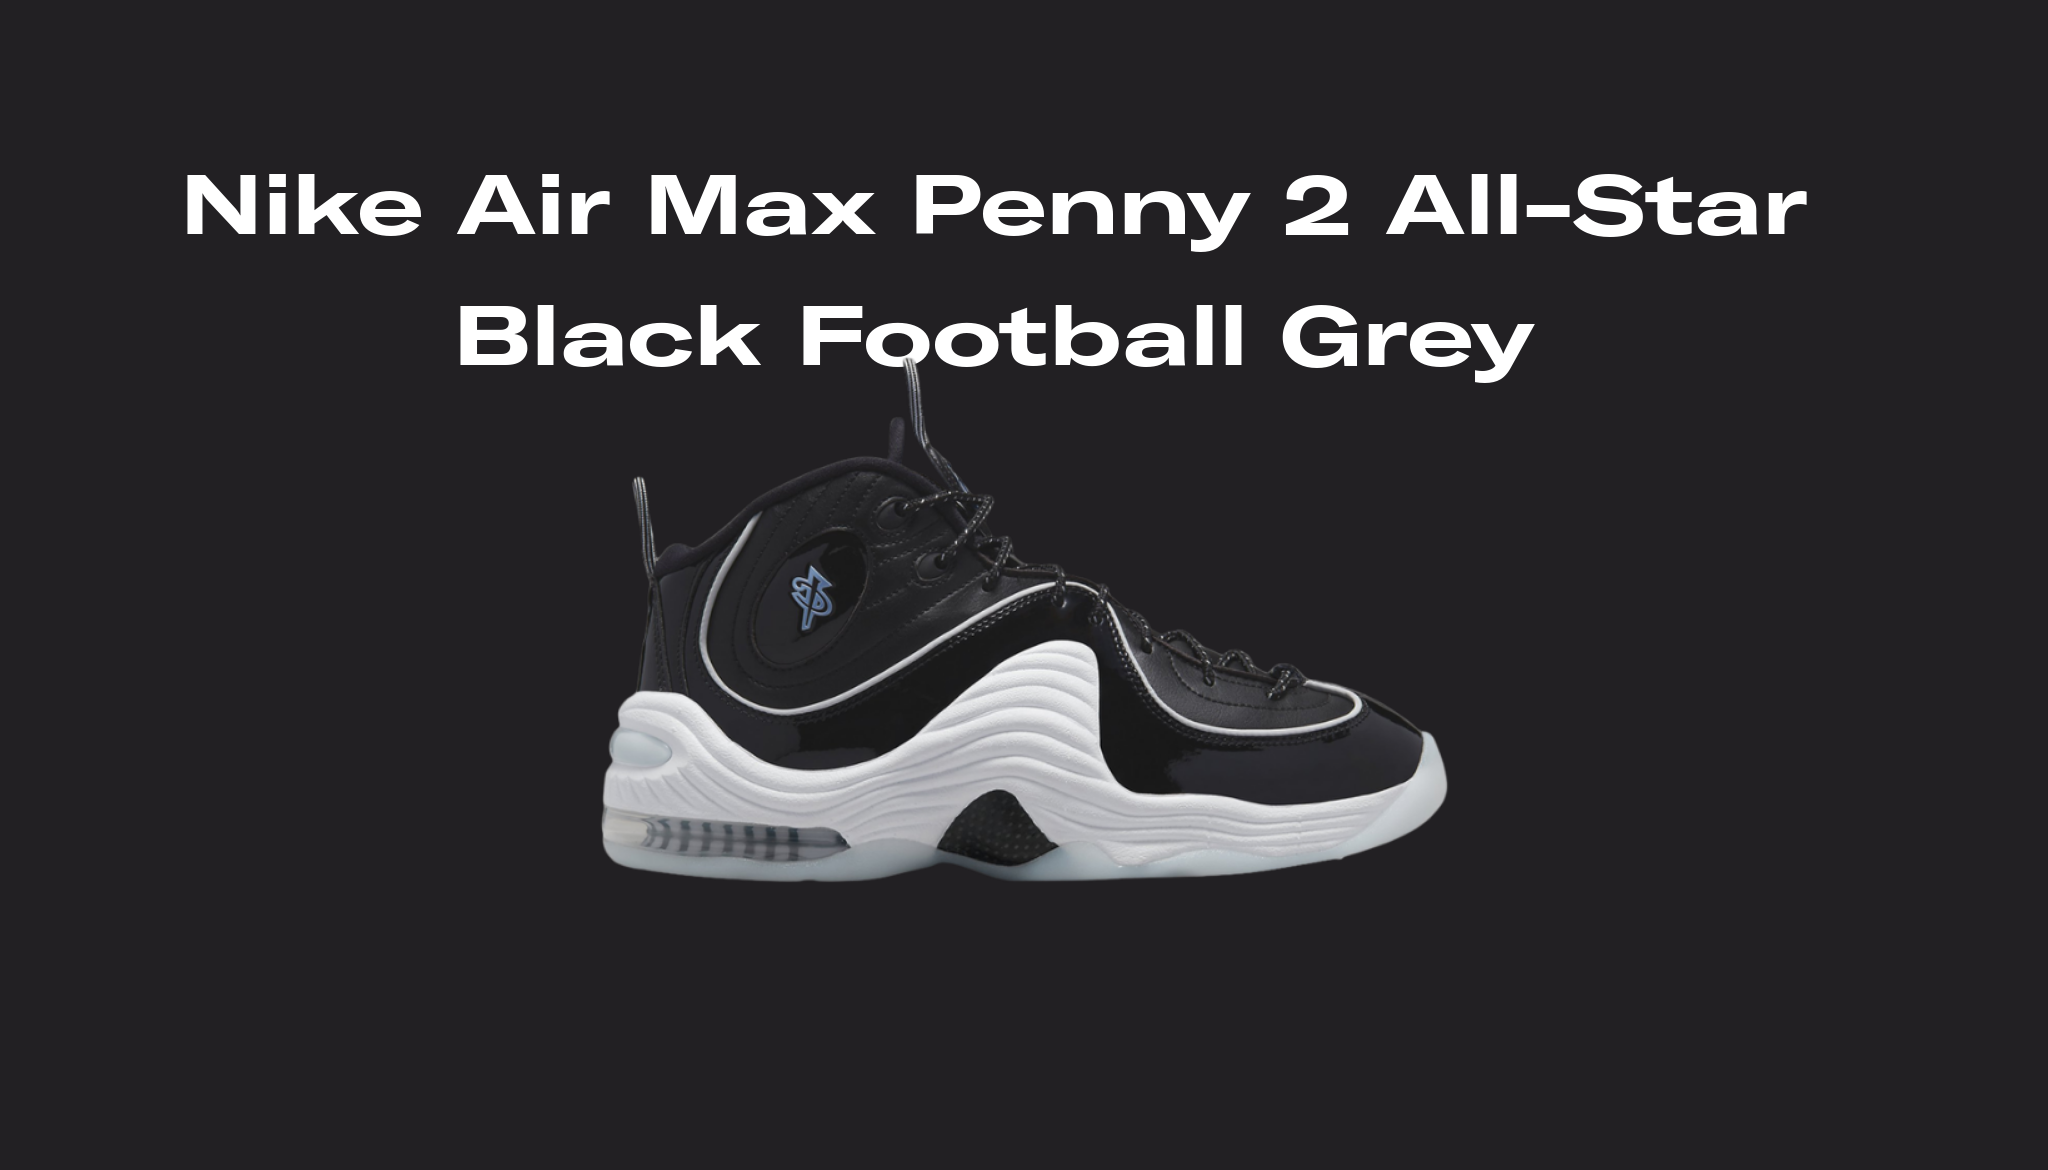 Nike Air Max Penny 2 All-Star Black Football Grey Release Date, Raffles,  and Where to Buy